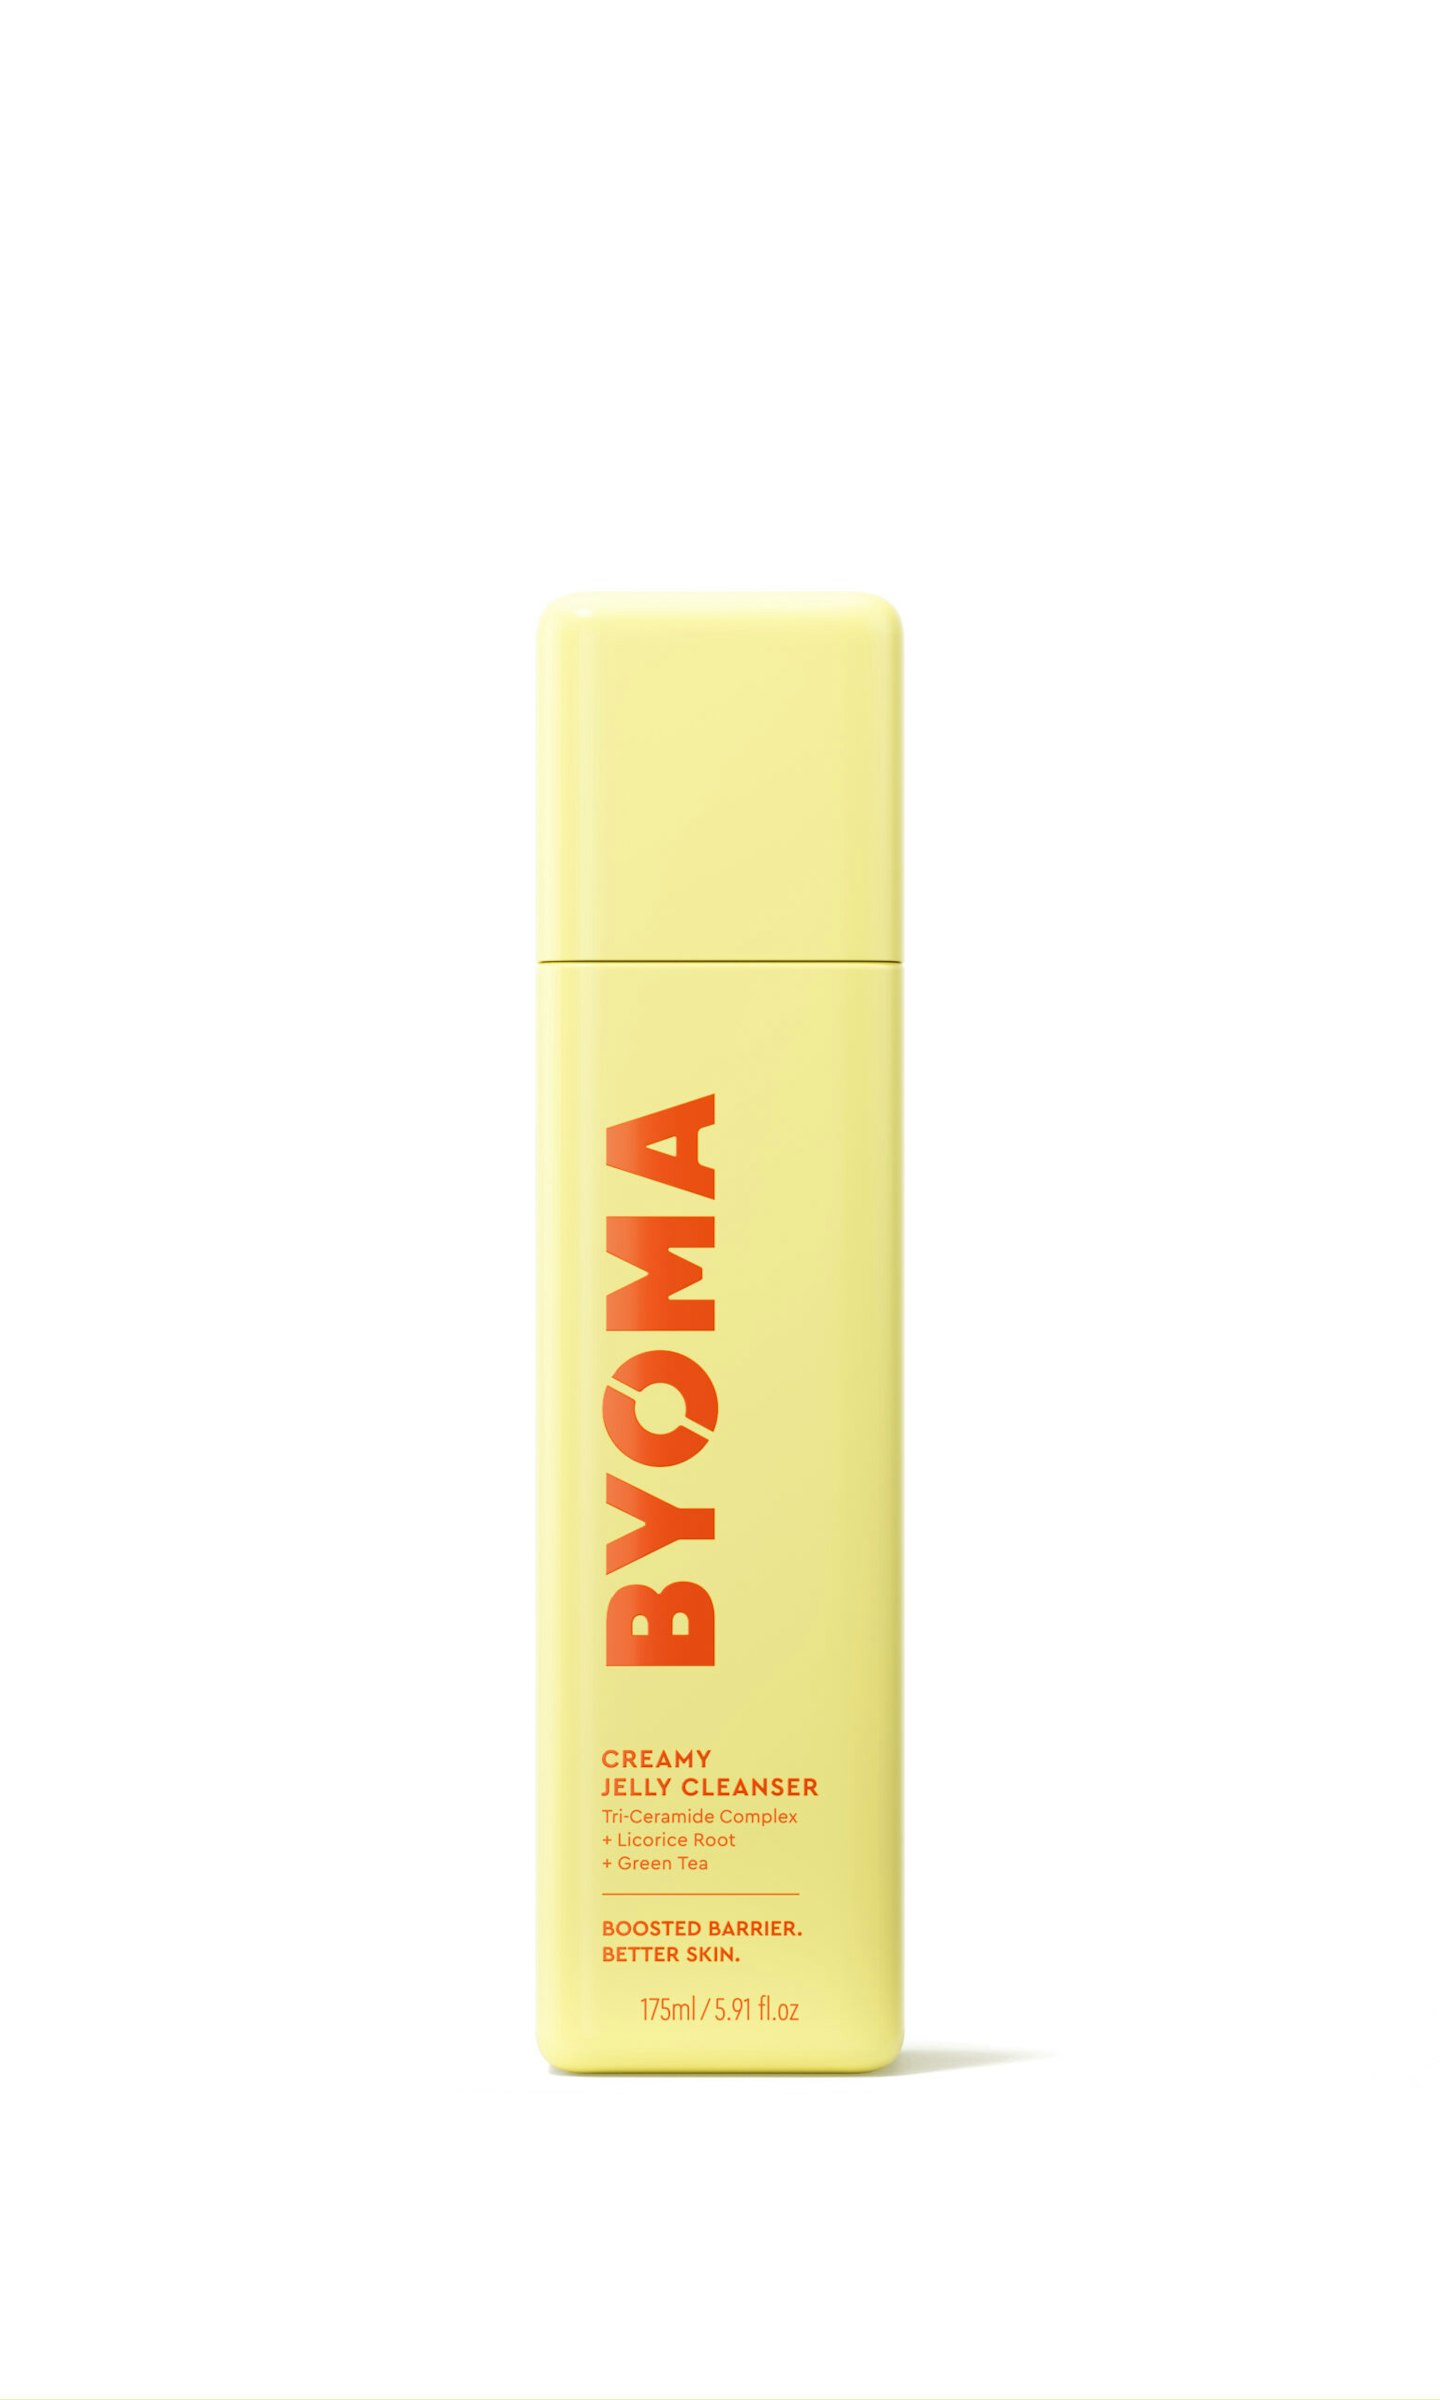 Byoma’s Creamy Jelly Cleanser 